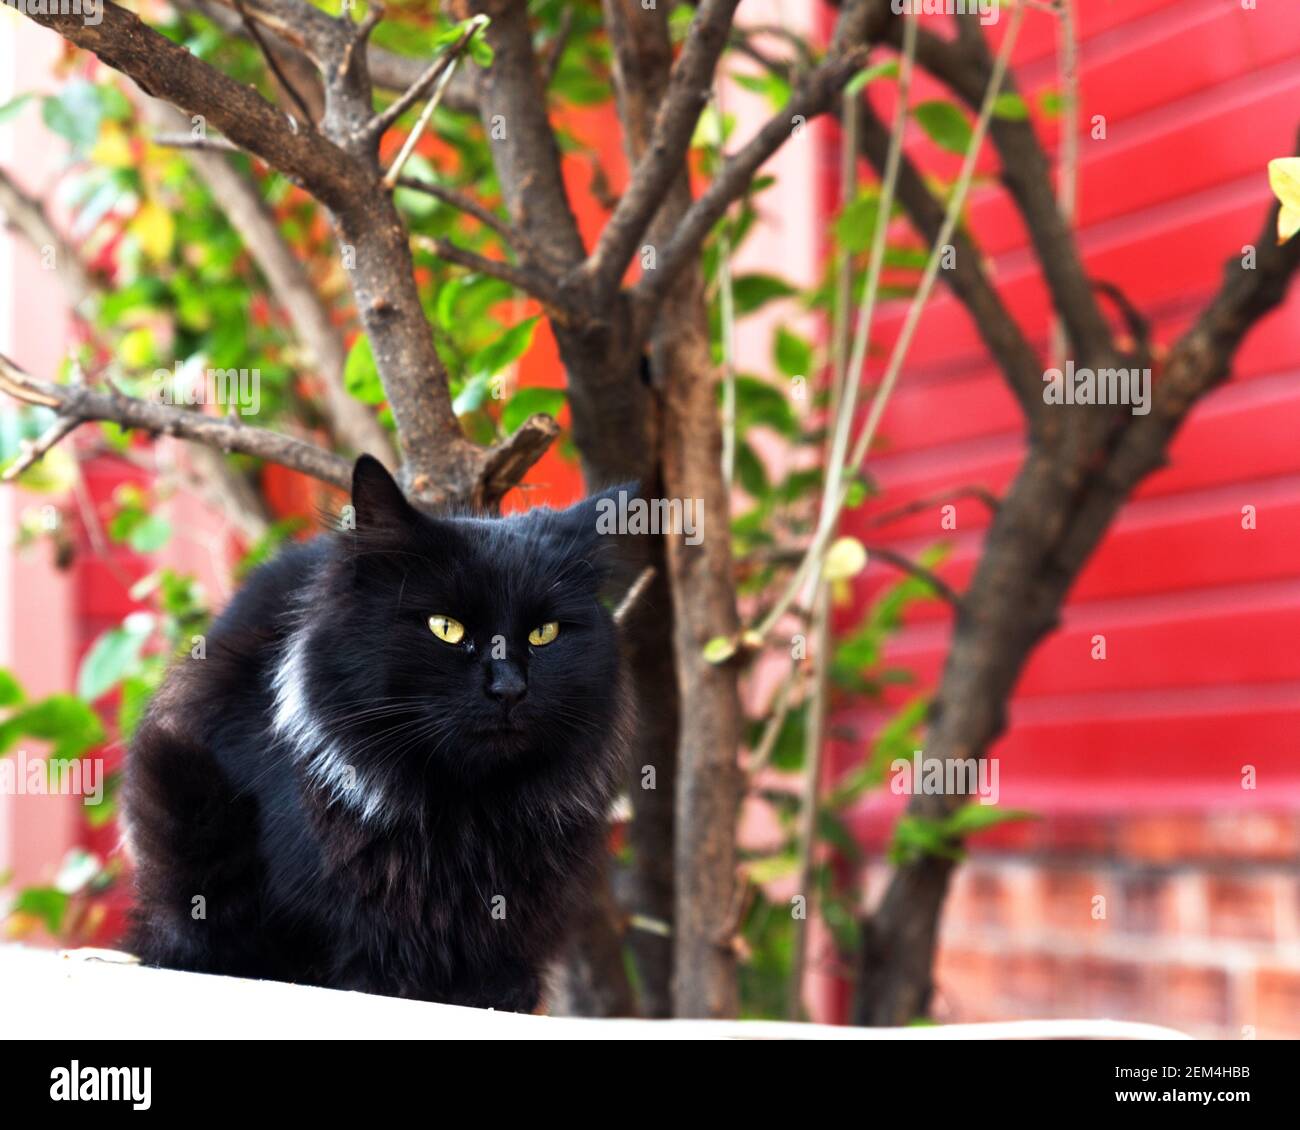 Front portrait of a black cat with nice white collar, sitting on a wall in a street, with some foliage in the background. Stock Photo